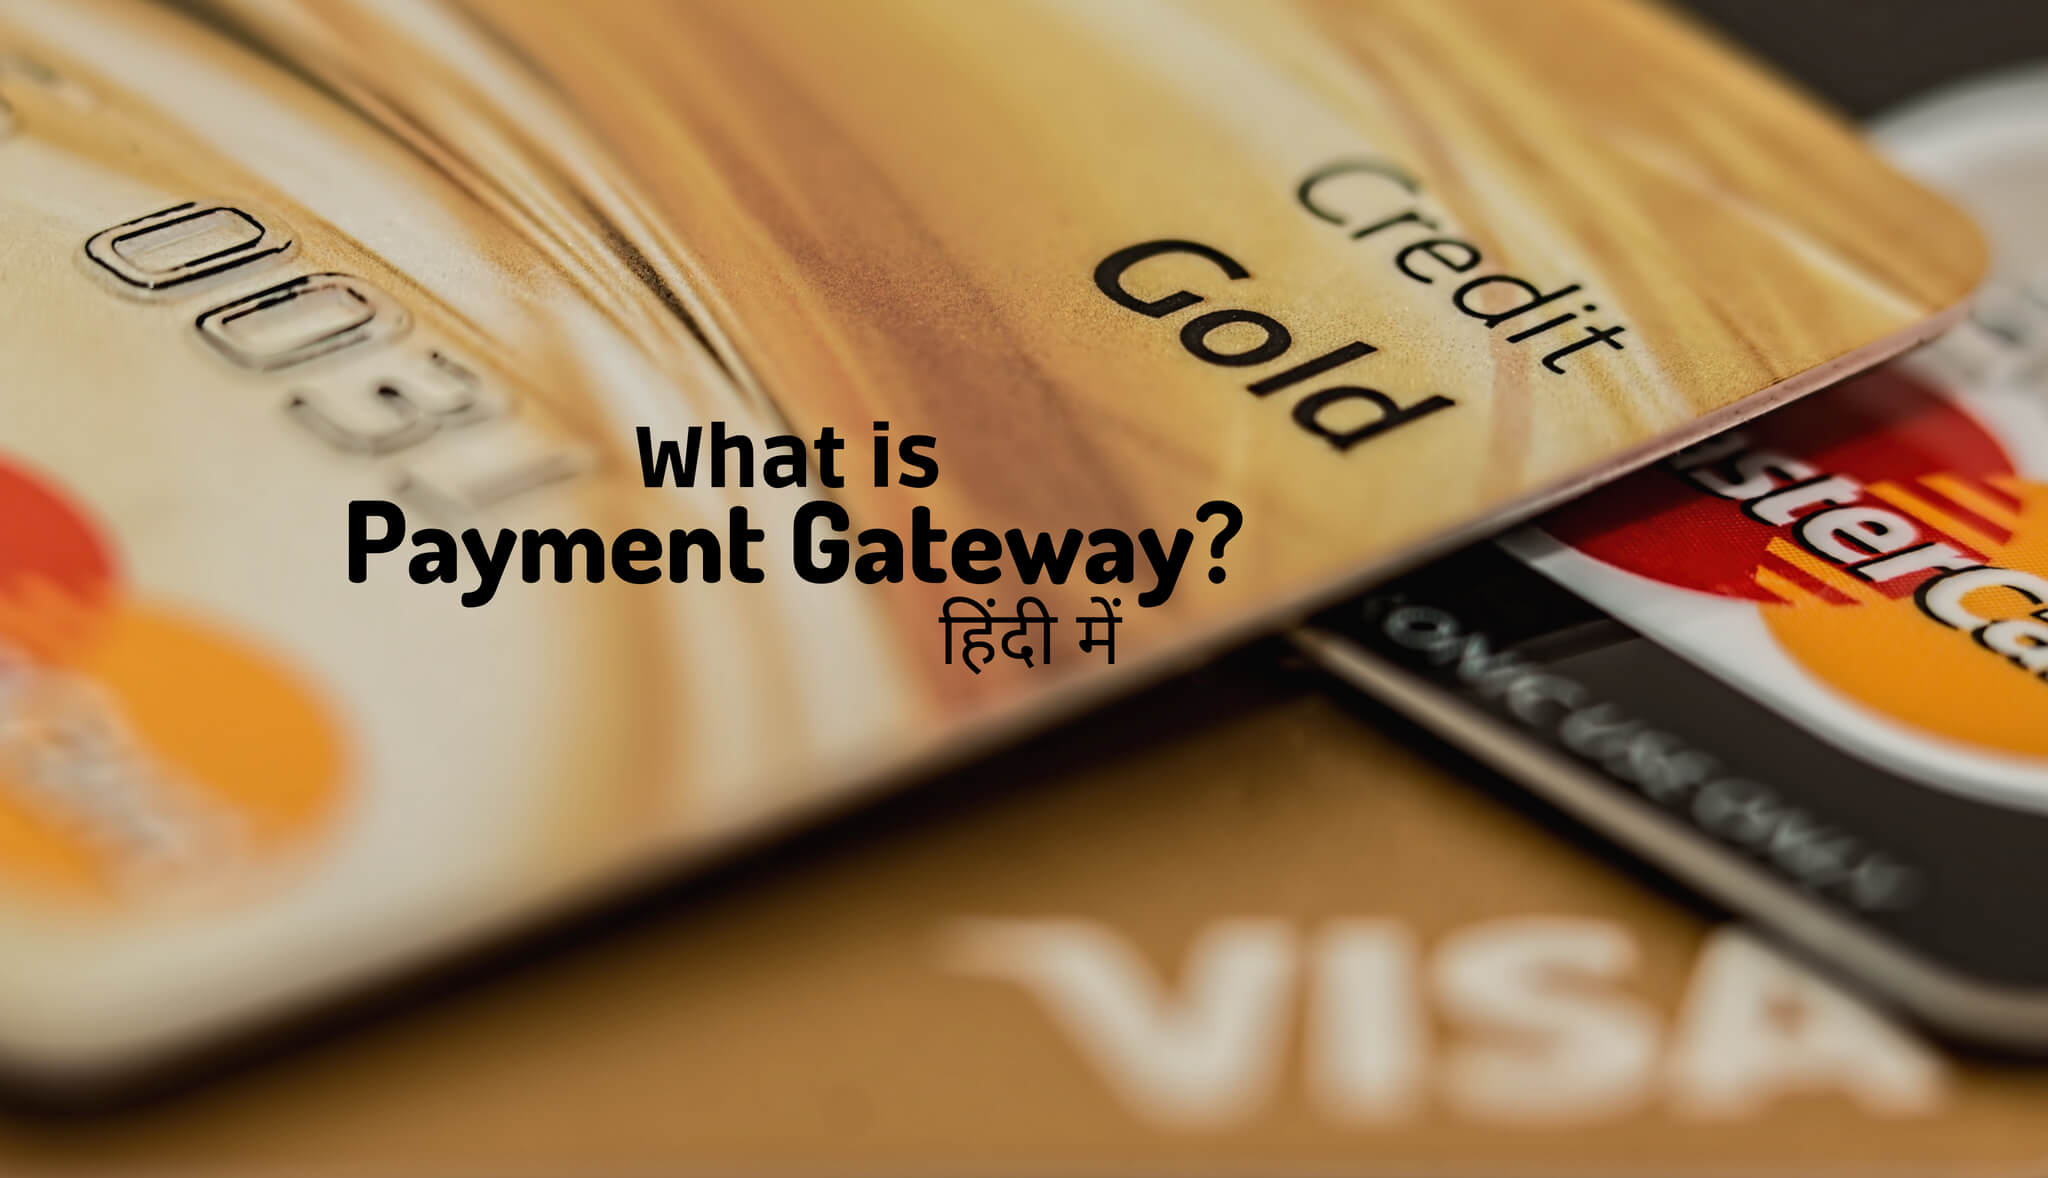 What is payment gateway in hindi